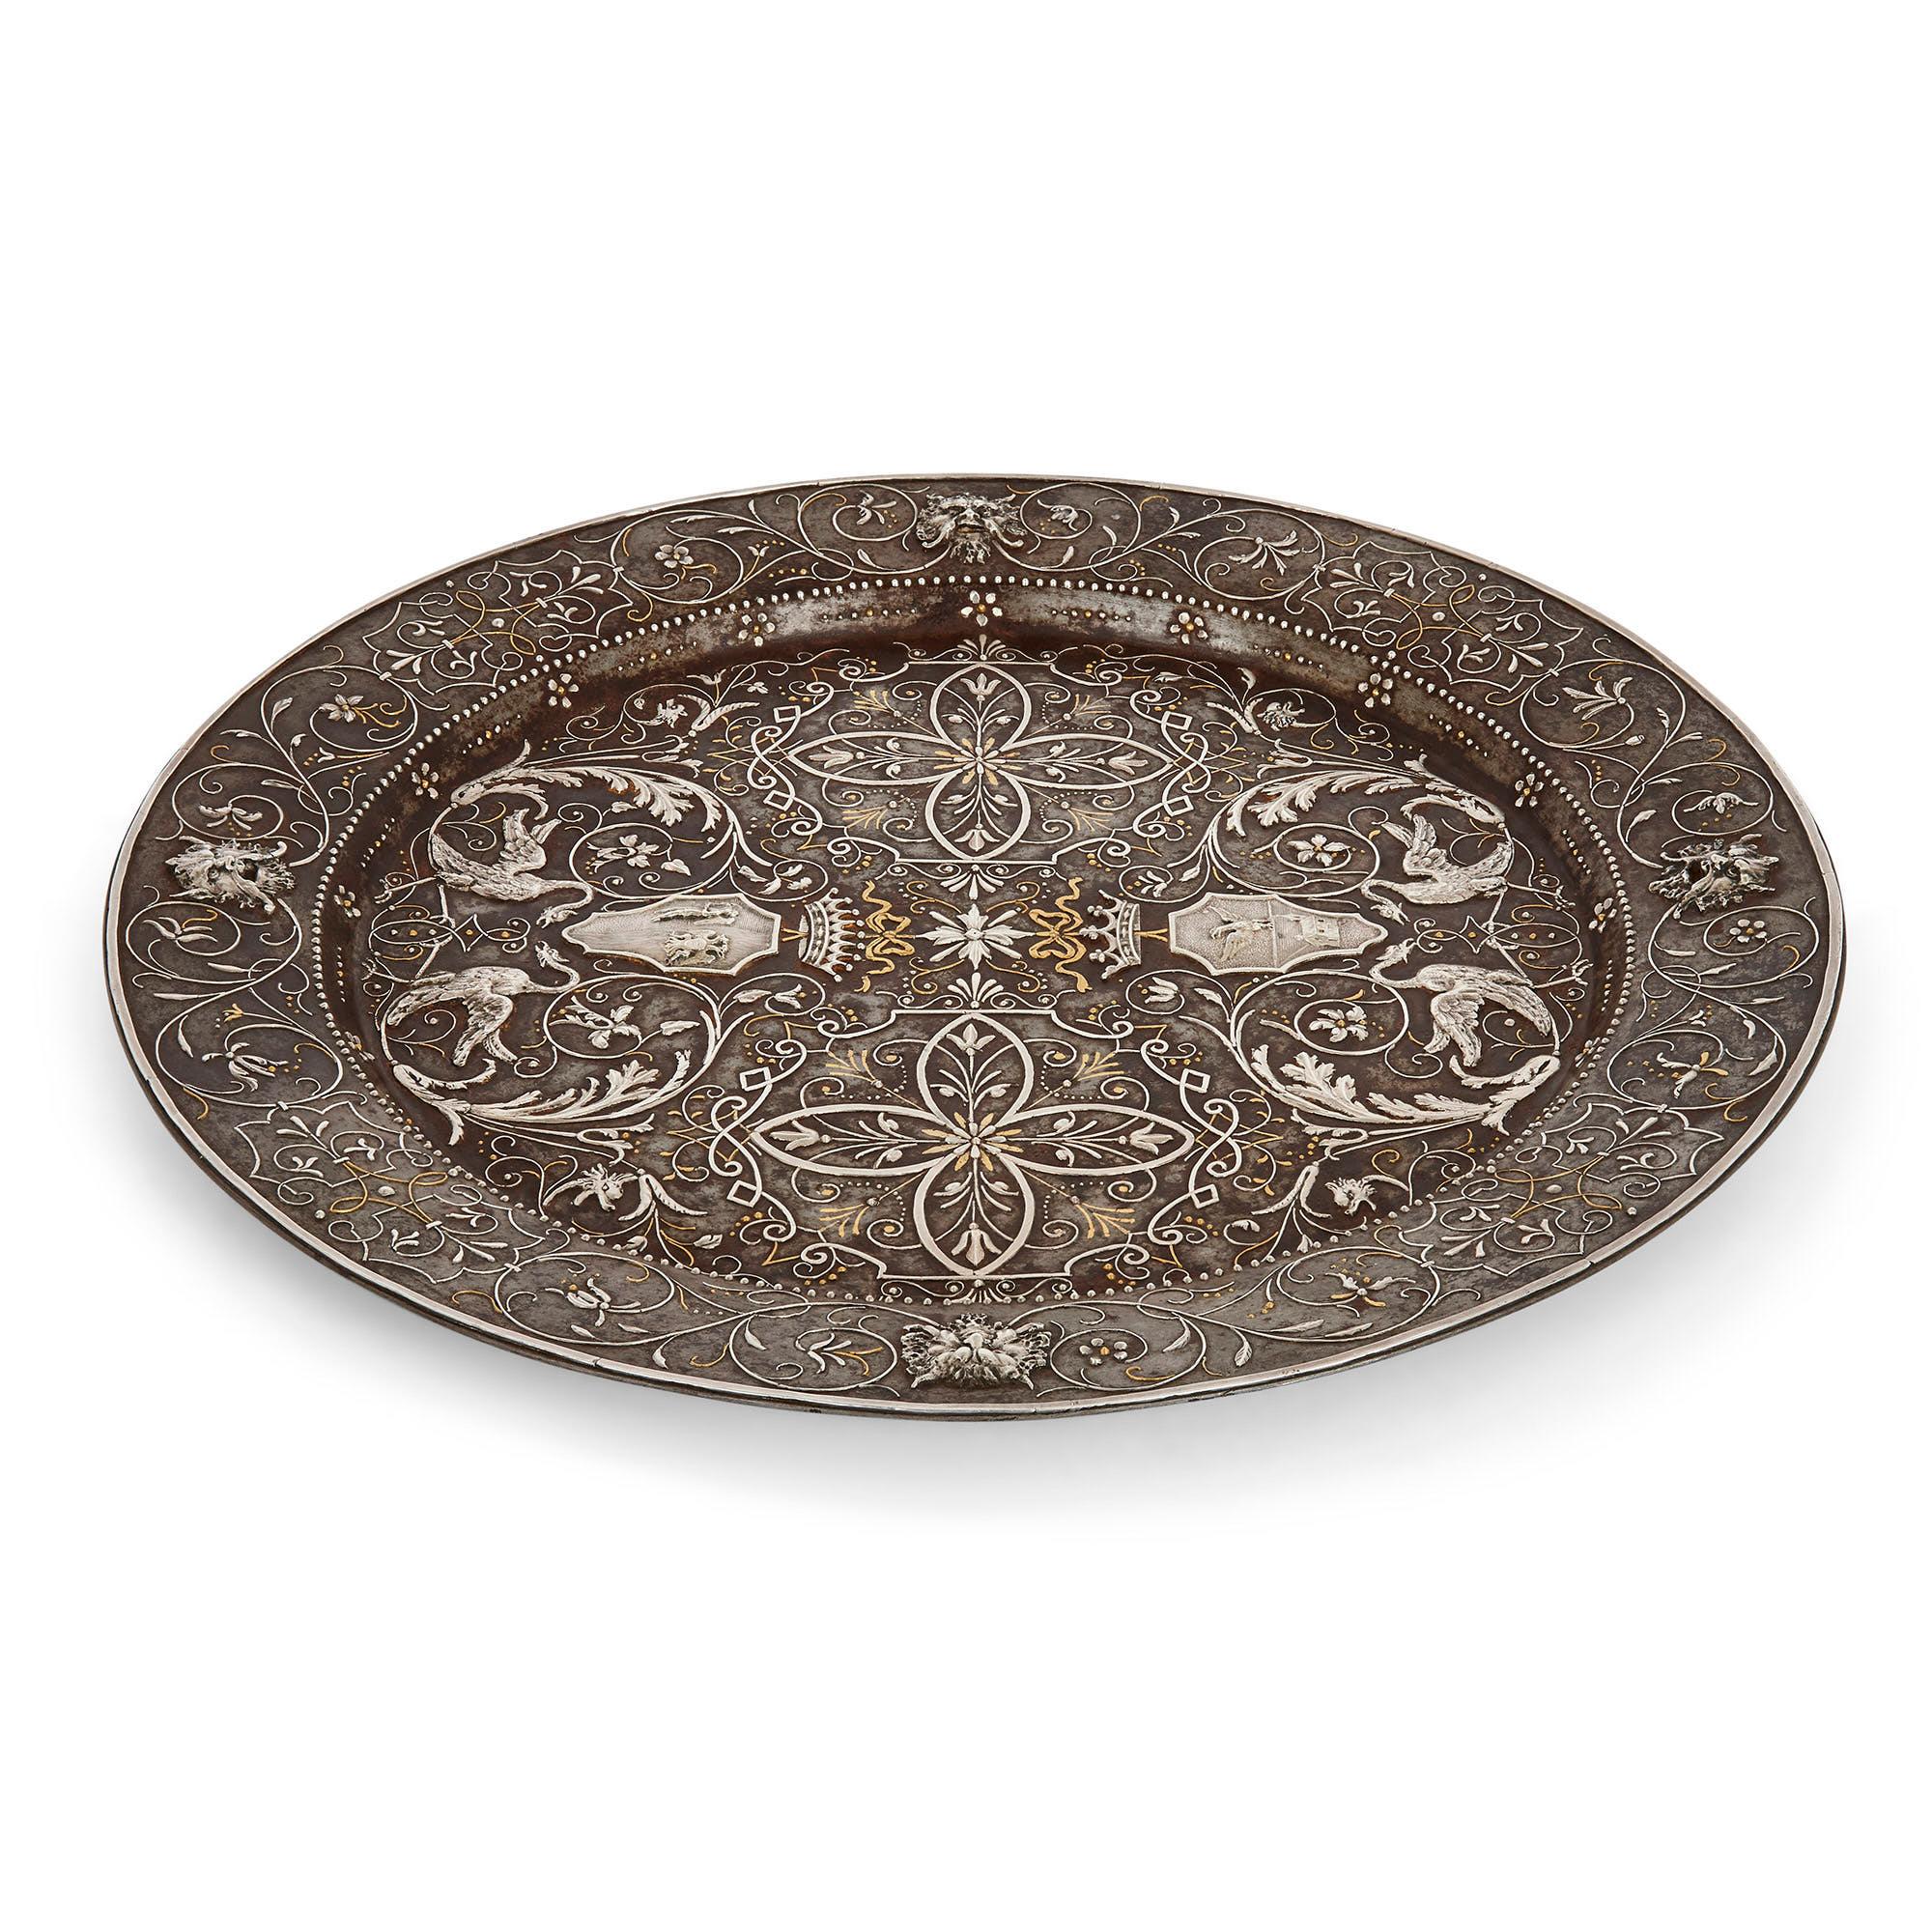 Antique Arabesque steel plate with gold and silver inlay.
Continental, 19th century
Dimensions: Height 2cm, diameter 32.5cm

Beautifully crafted from steel with gold and silver damascening, this fine 19th century plate is profusely decorated